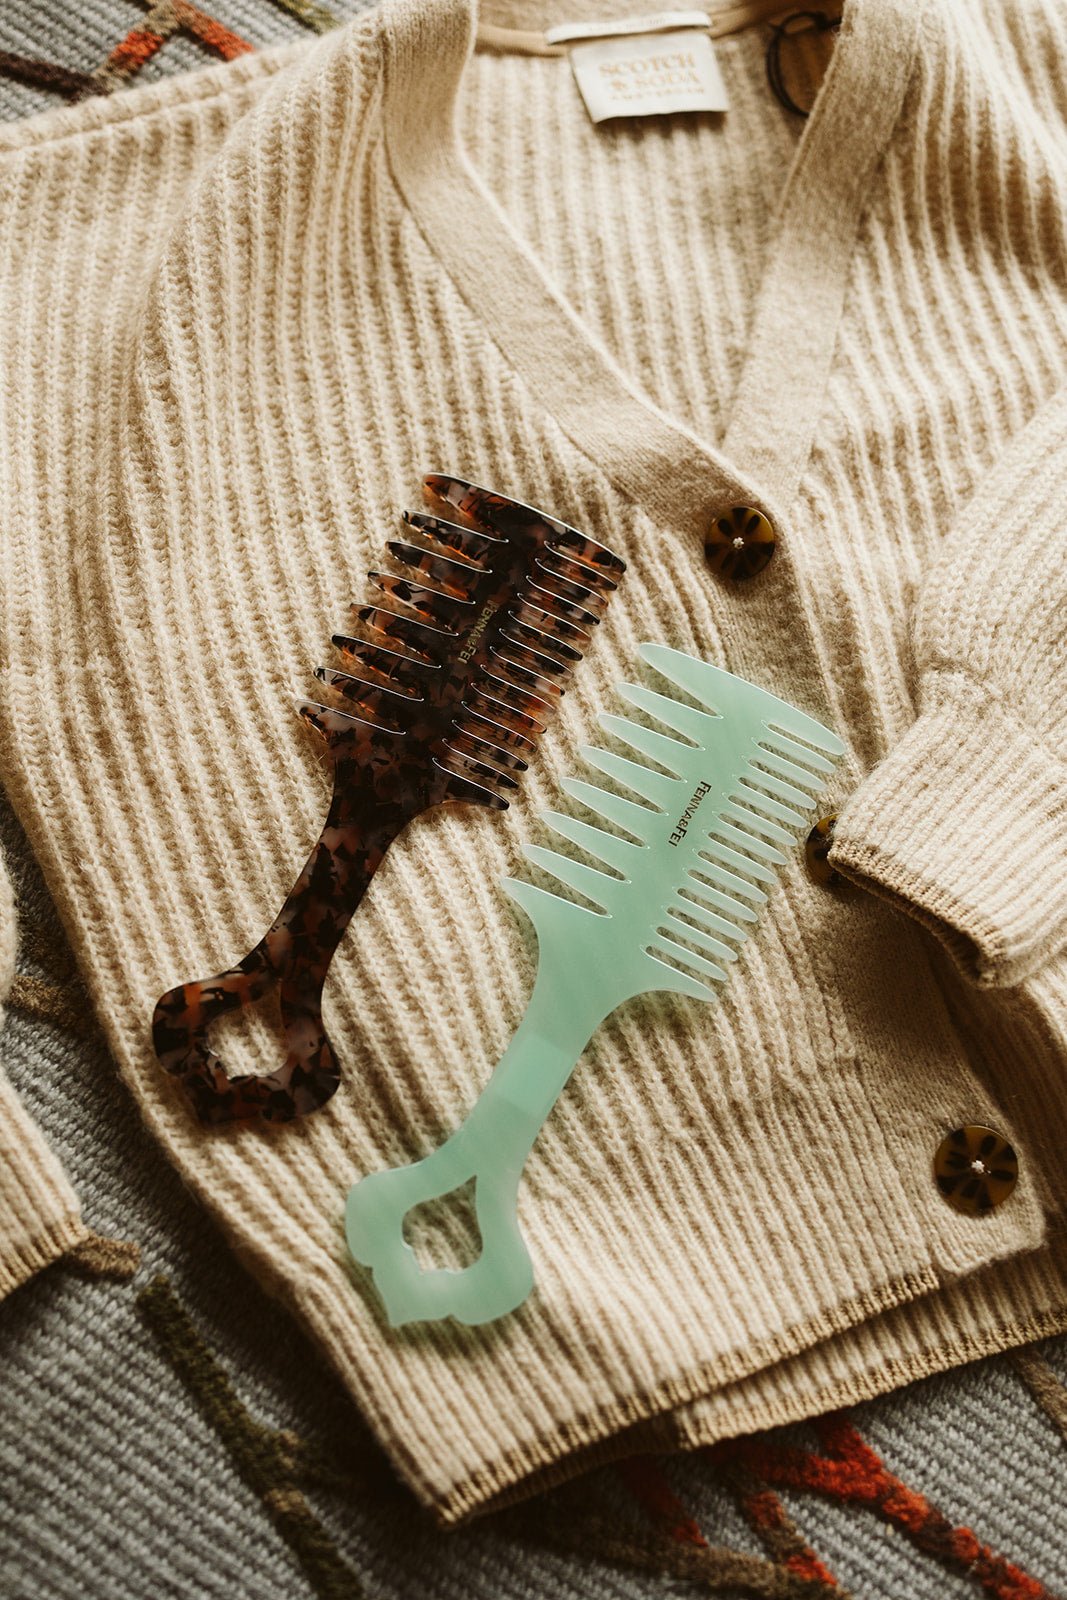 Large Handle Comb